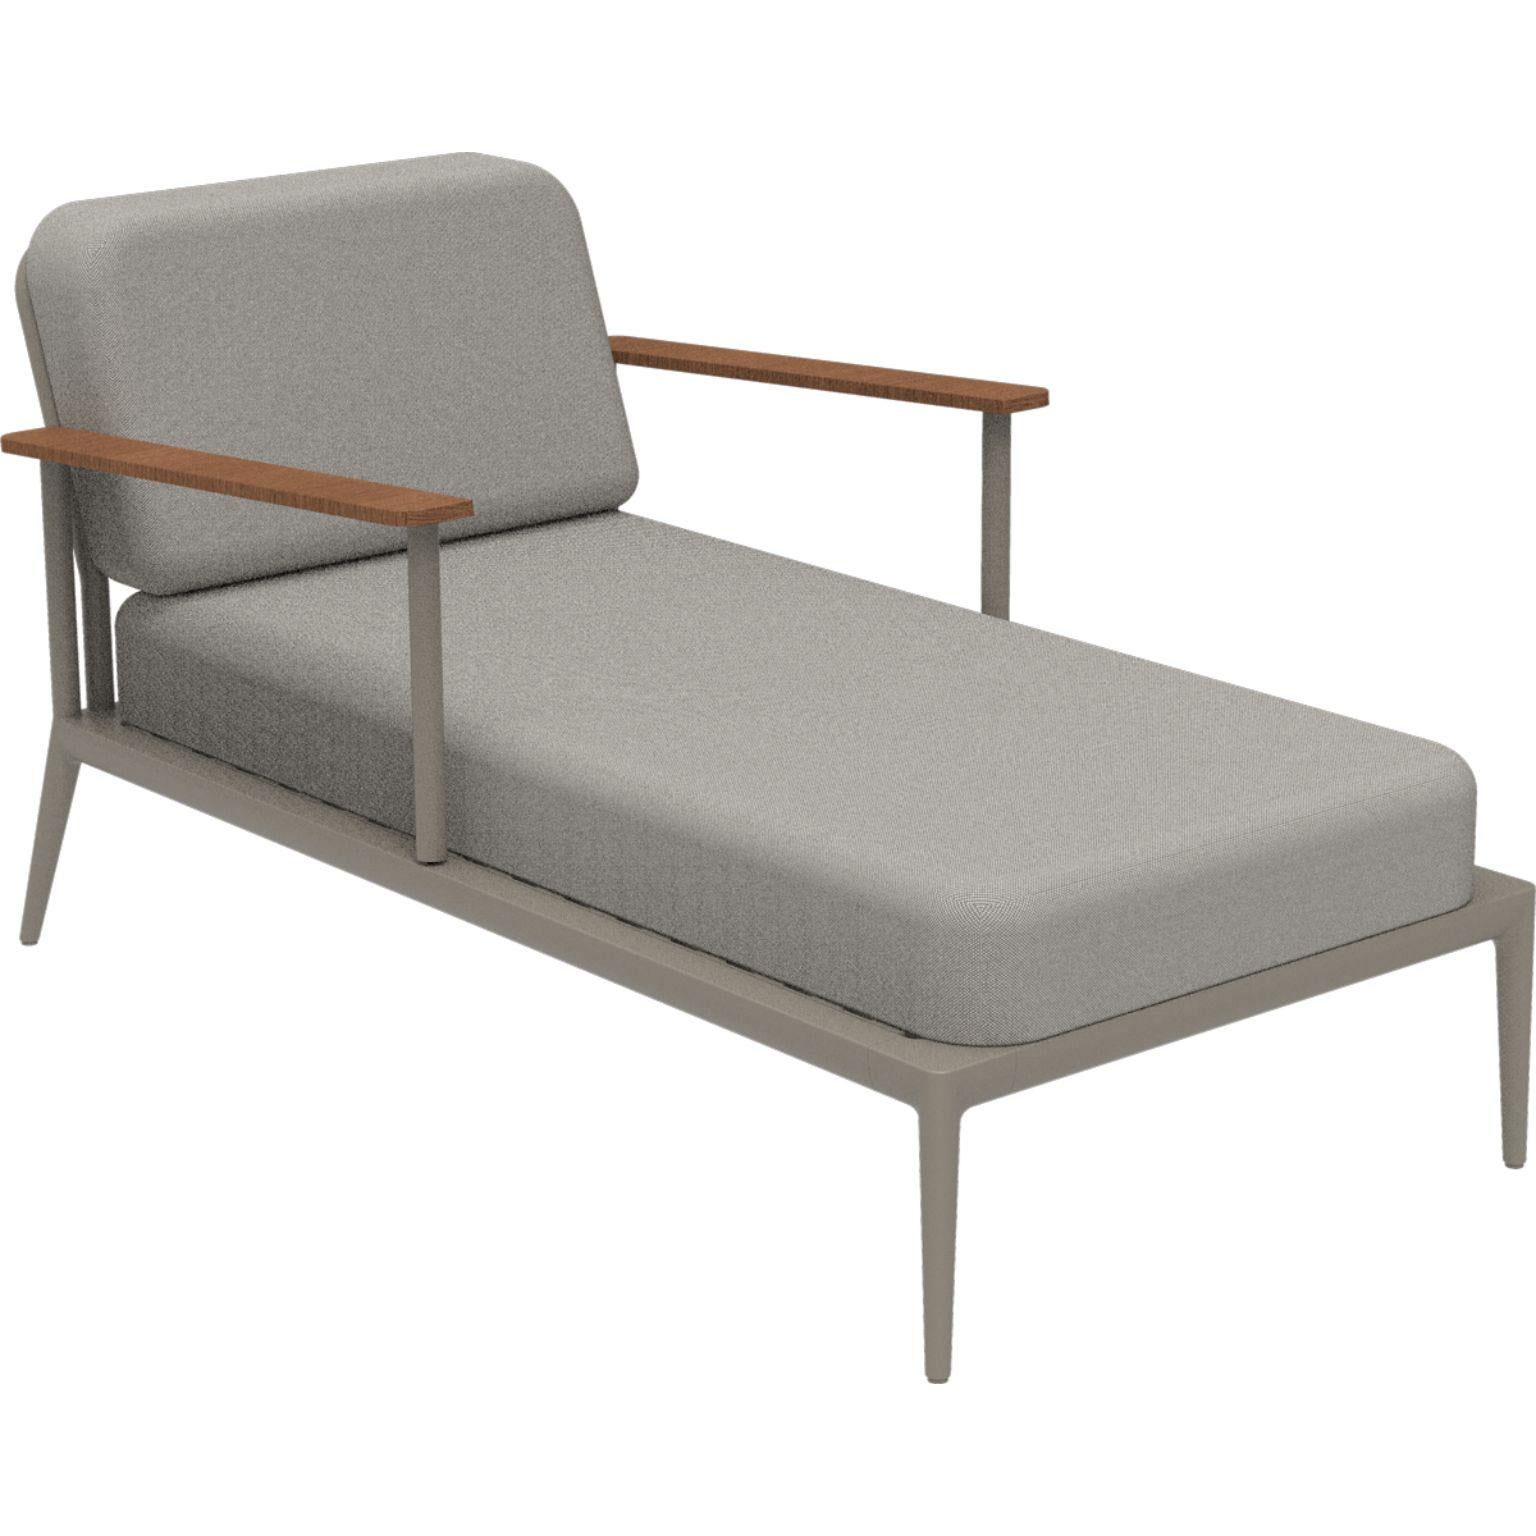 Nature Cream Divan by MOWEE
Dimensions: D155 x W83 x H81 cm (seat height 42 cm).
Material: Aluminum, upholstery and Iroko wood.
Weight: 30 kg.
Also available in different colors and finishes. Please contact us.

An unmistakable collection for